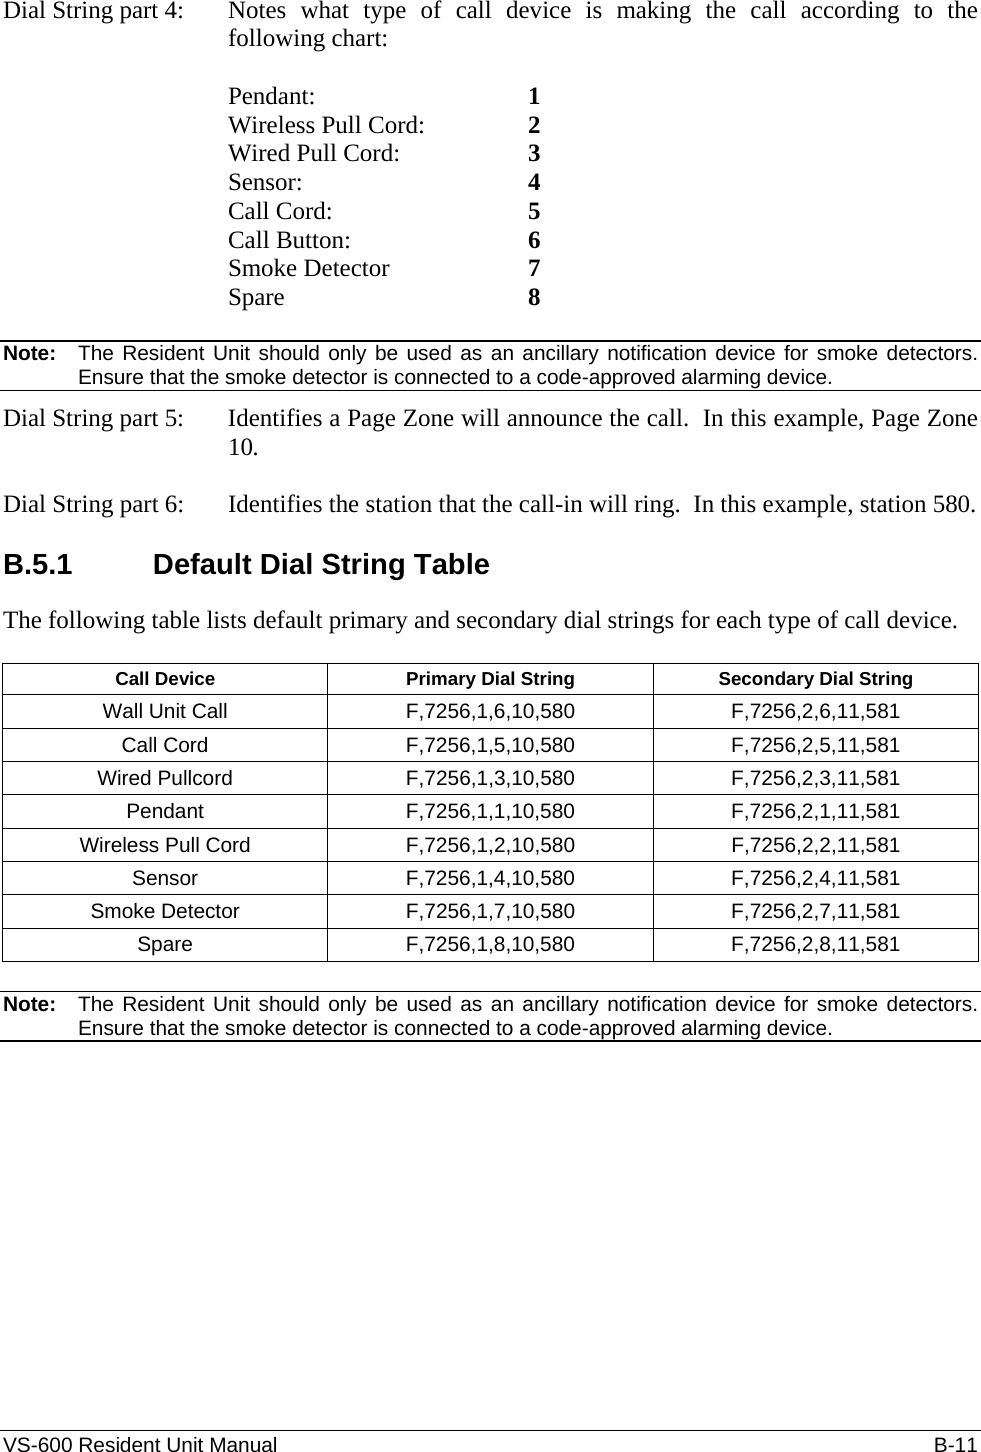 VS-600 Resident Unit Manual    B-11 Dial String part 4:  Notes what type of call device is making the call according to the following chart:  Pendant:     1 Wireless Pull Cord:    2 Wired Pull Cord:    3 Sensor:   4 Call Cord:      5 Call Button:      6 Smoke Detector   7 Spare     8  Note:  The Resident Unit should only be used as an ancillary notification device for smoke detectors.  Ensure that the smoke detector is connected to a code-approved alarming device. Dial String part 5:   Identifies a Page Zone will announce the call.  In this example, Page Zone 10.  Dial String part 6:  Identifies the station that the call-in will ring.  In this example, station 580.  B.5.1  Default Dial String Table The following table lists default primary and secondary dial strings for each type of call device.  Call Device  Primary Dial String  Secondary Dial String Wall Unit Call  F,7256,1,6,10,580 F,7256,2,6,11,581 Call Cord  F,7256,1,5,10,580 F,7256,2,5,11,581 Wired Pullcord  F,7256,1,3,10,580 F,7256,2,3,11,581 Pendant F,7256,1,1,10,580 F,7256,2,1,11,581 Wireless Pull Cord  F,7256,1,2,10,580 F,7256,2,2,11,581 Sensor F,7256,1,4,10,580 F,7256,2,4,11,581 Smoke Detector  F,7256,1,7,10,580 F,7256,2,7,11,581 Spare F,7256,1,8,10,580 F,7256,2,8,11,581  Note:  The Resident Unit should only be used as an ancillary notification device for smoke detectors.  Ensure that the smoke detector is connected to a code-approved alarming device.  